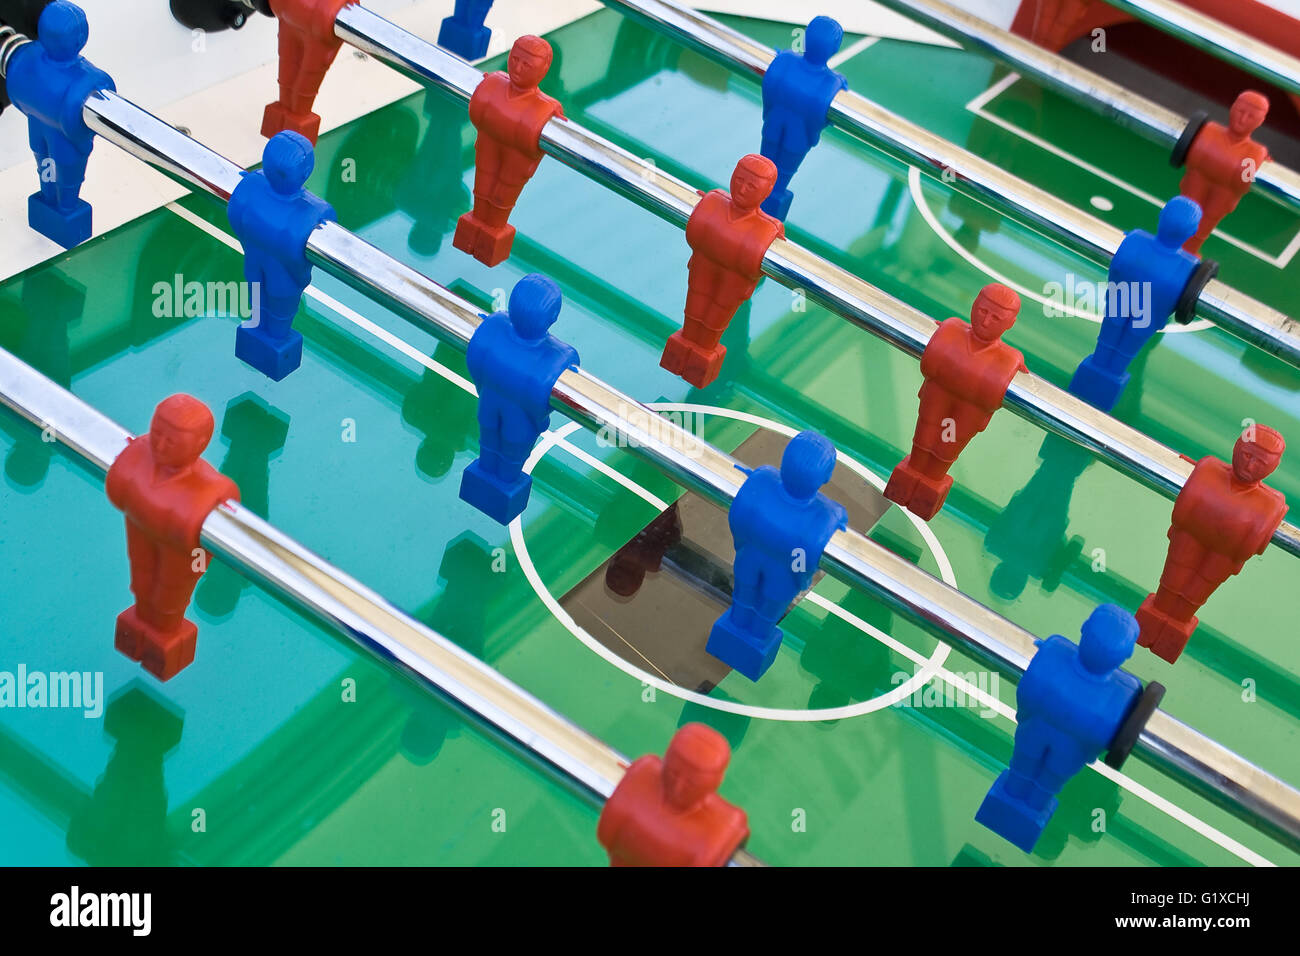 Tabletop football with red and blue figures Stock Photo